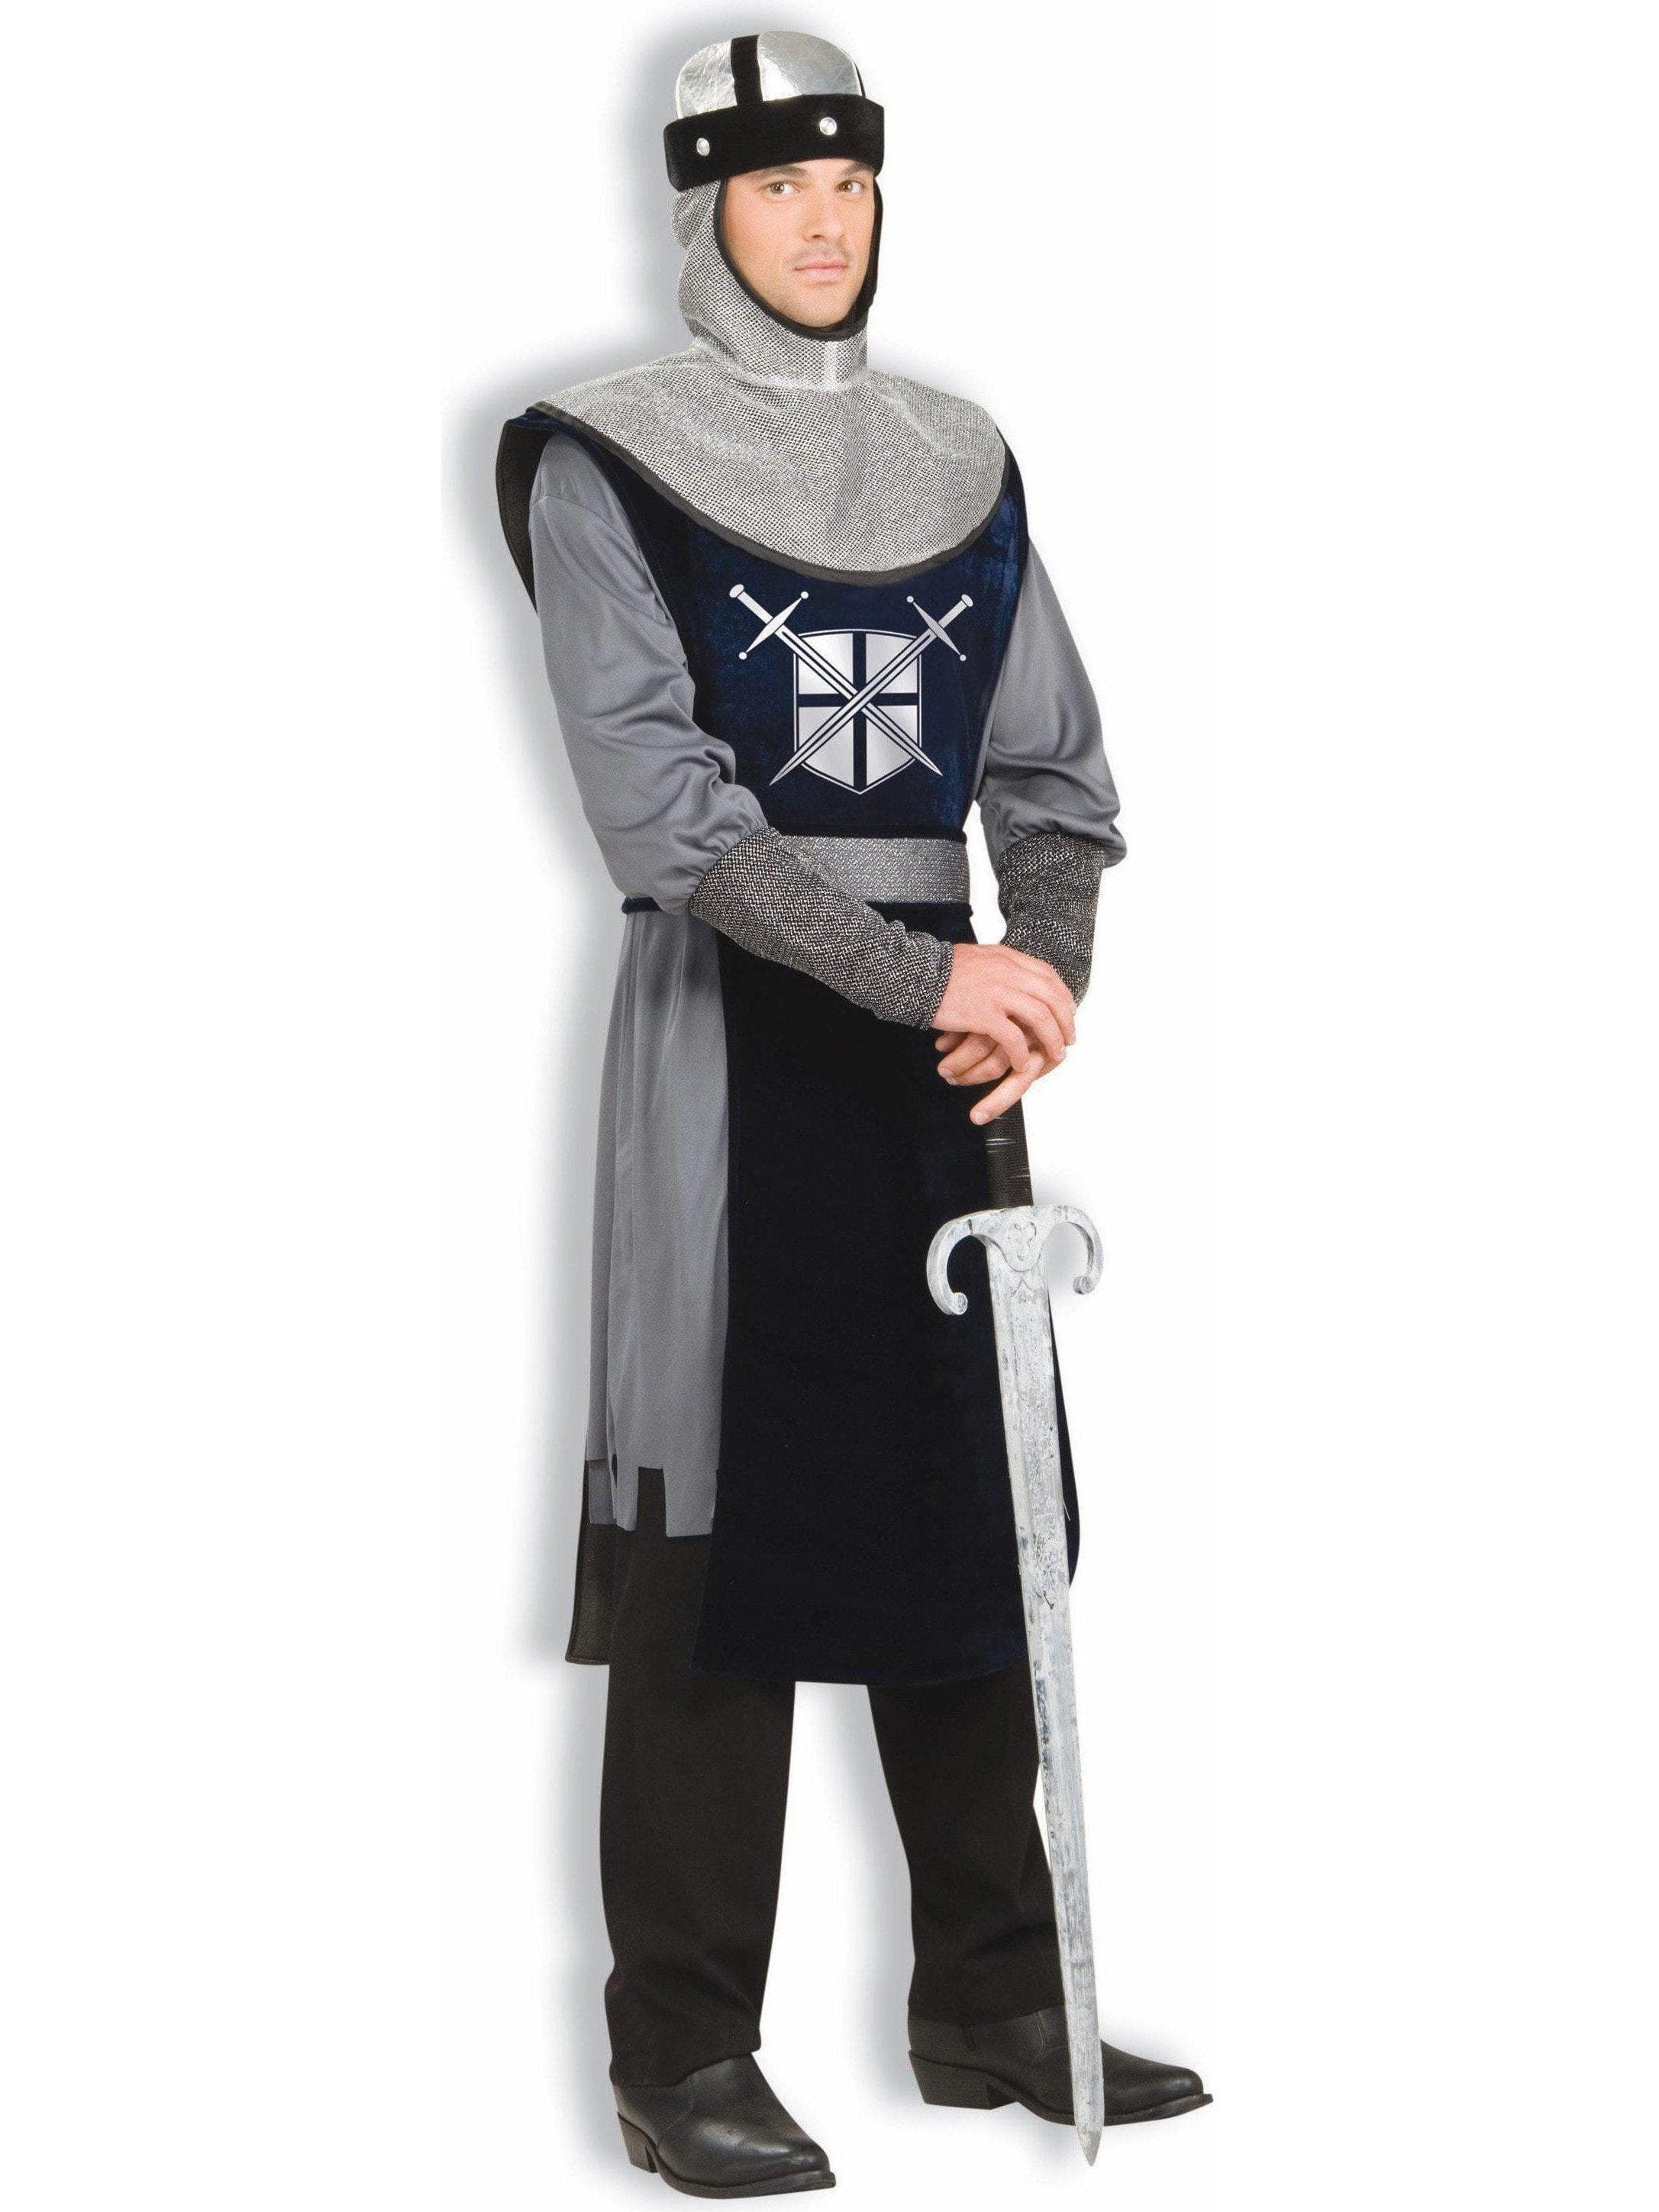 Men's Knight of the Round Table Costume - costumes.com